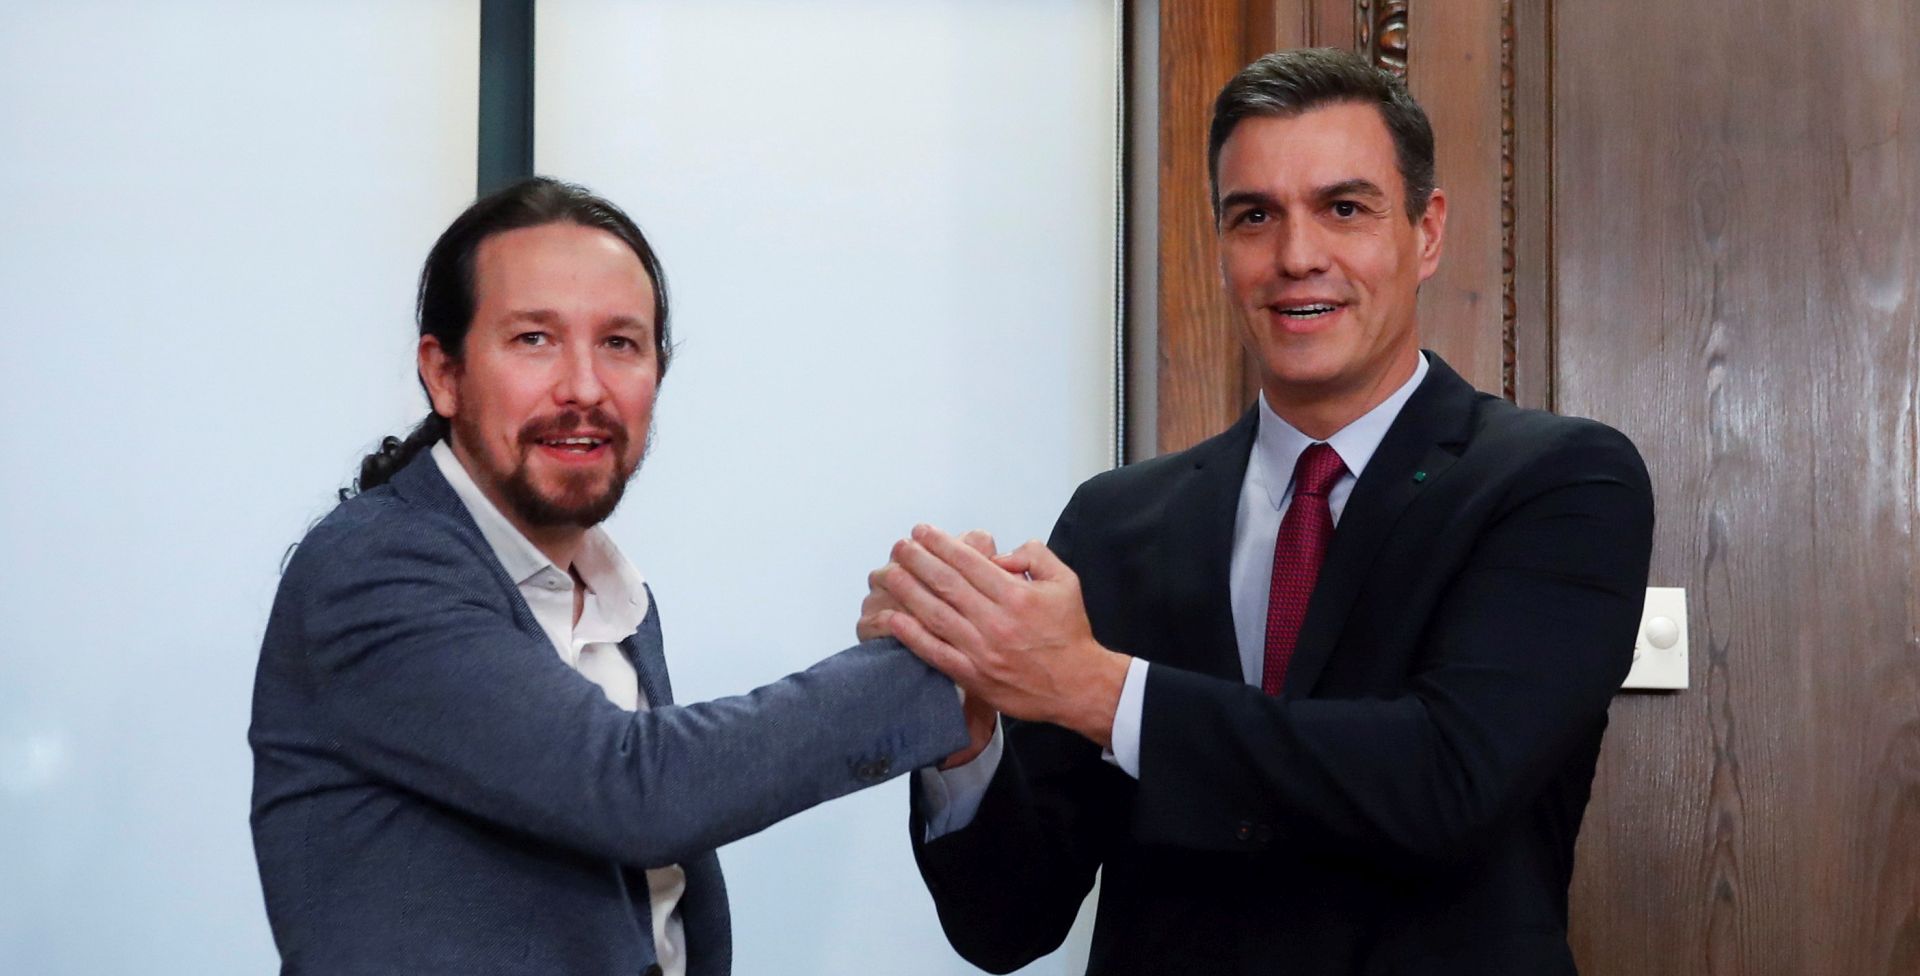 epa08095094 Acting Spanish Prime Minister, Pedro Sanchez (R) and Spanish Podemos Party's leader Pablo Iglesias (L) pose after a meeting to sign a preliminary policy agreement at the Spanish Lower House in Madrid, Spain, 30 December 2019. Spanish Socialist Party and Podemos Party have reached a deal to form a coalition government that is still pending the support of Catalan pro-independence party Esquerra Repulicana (ERC) to abstain in the voting and thus invest Sanchez.  EPA/JuanJo Martin